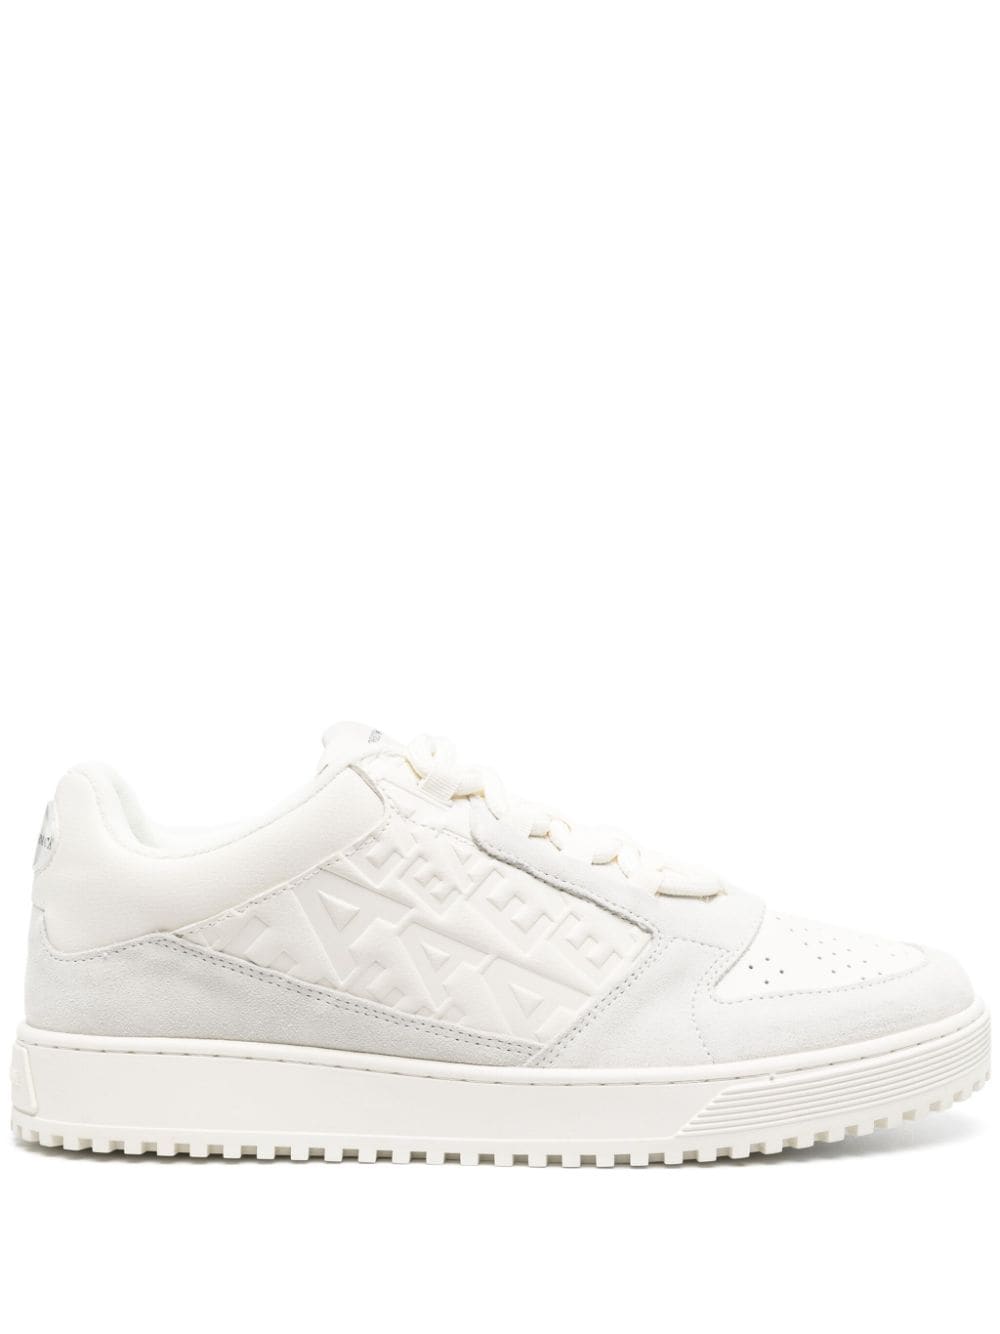 Emporio Armani Official Store Leather And Suede Sneakers With Ea Logo In White